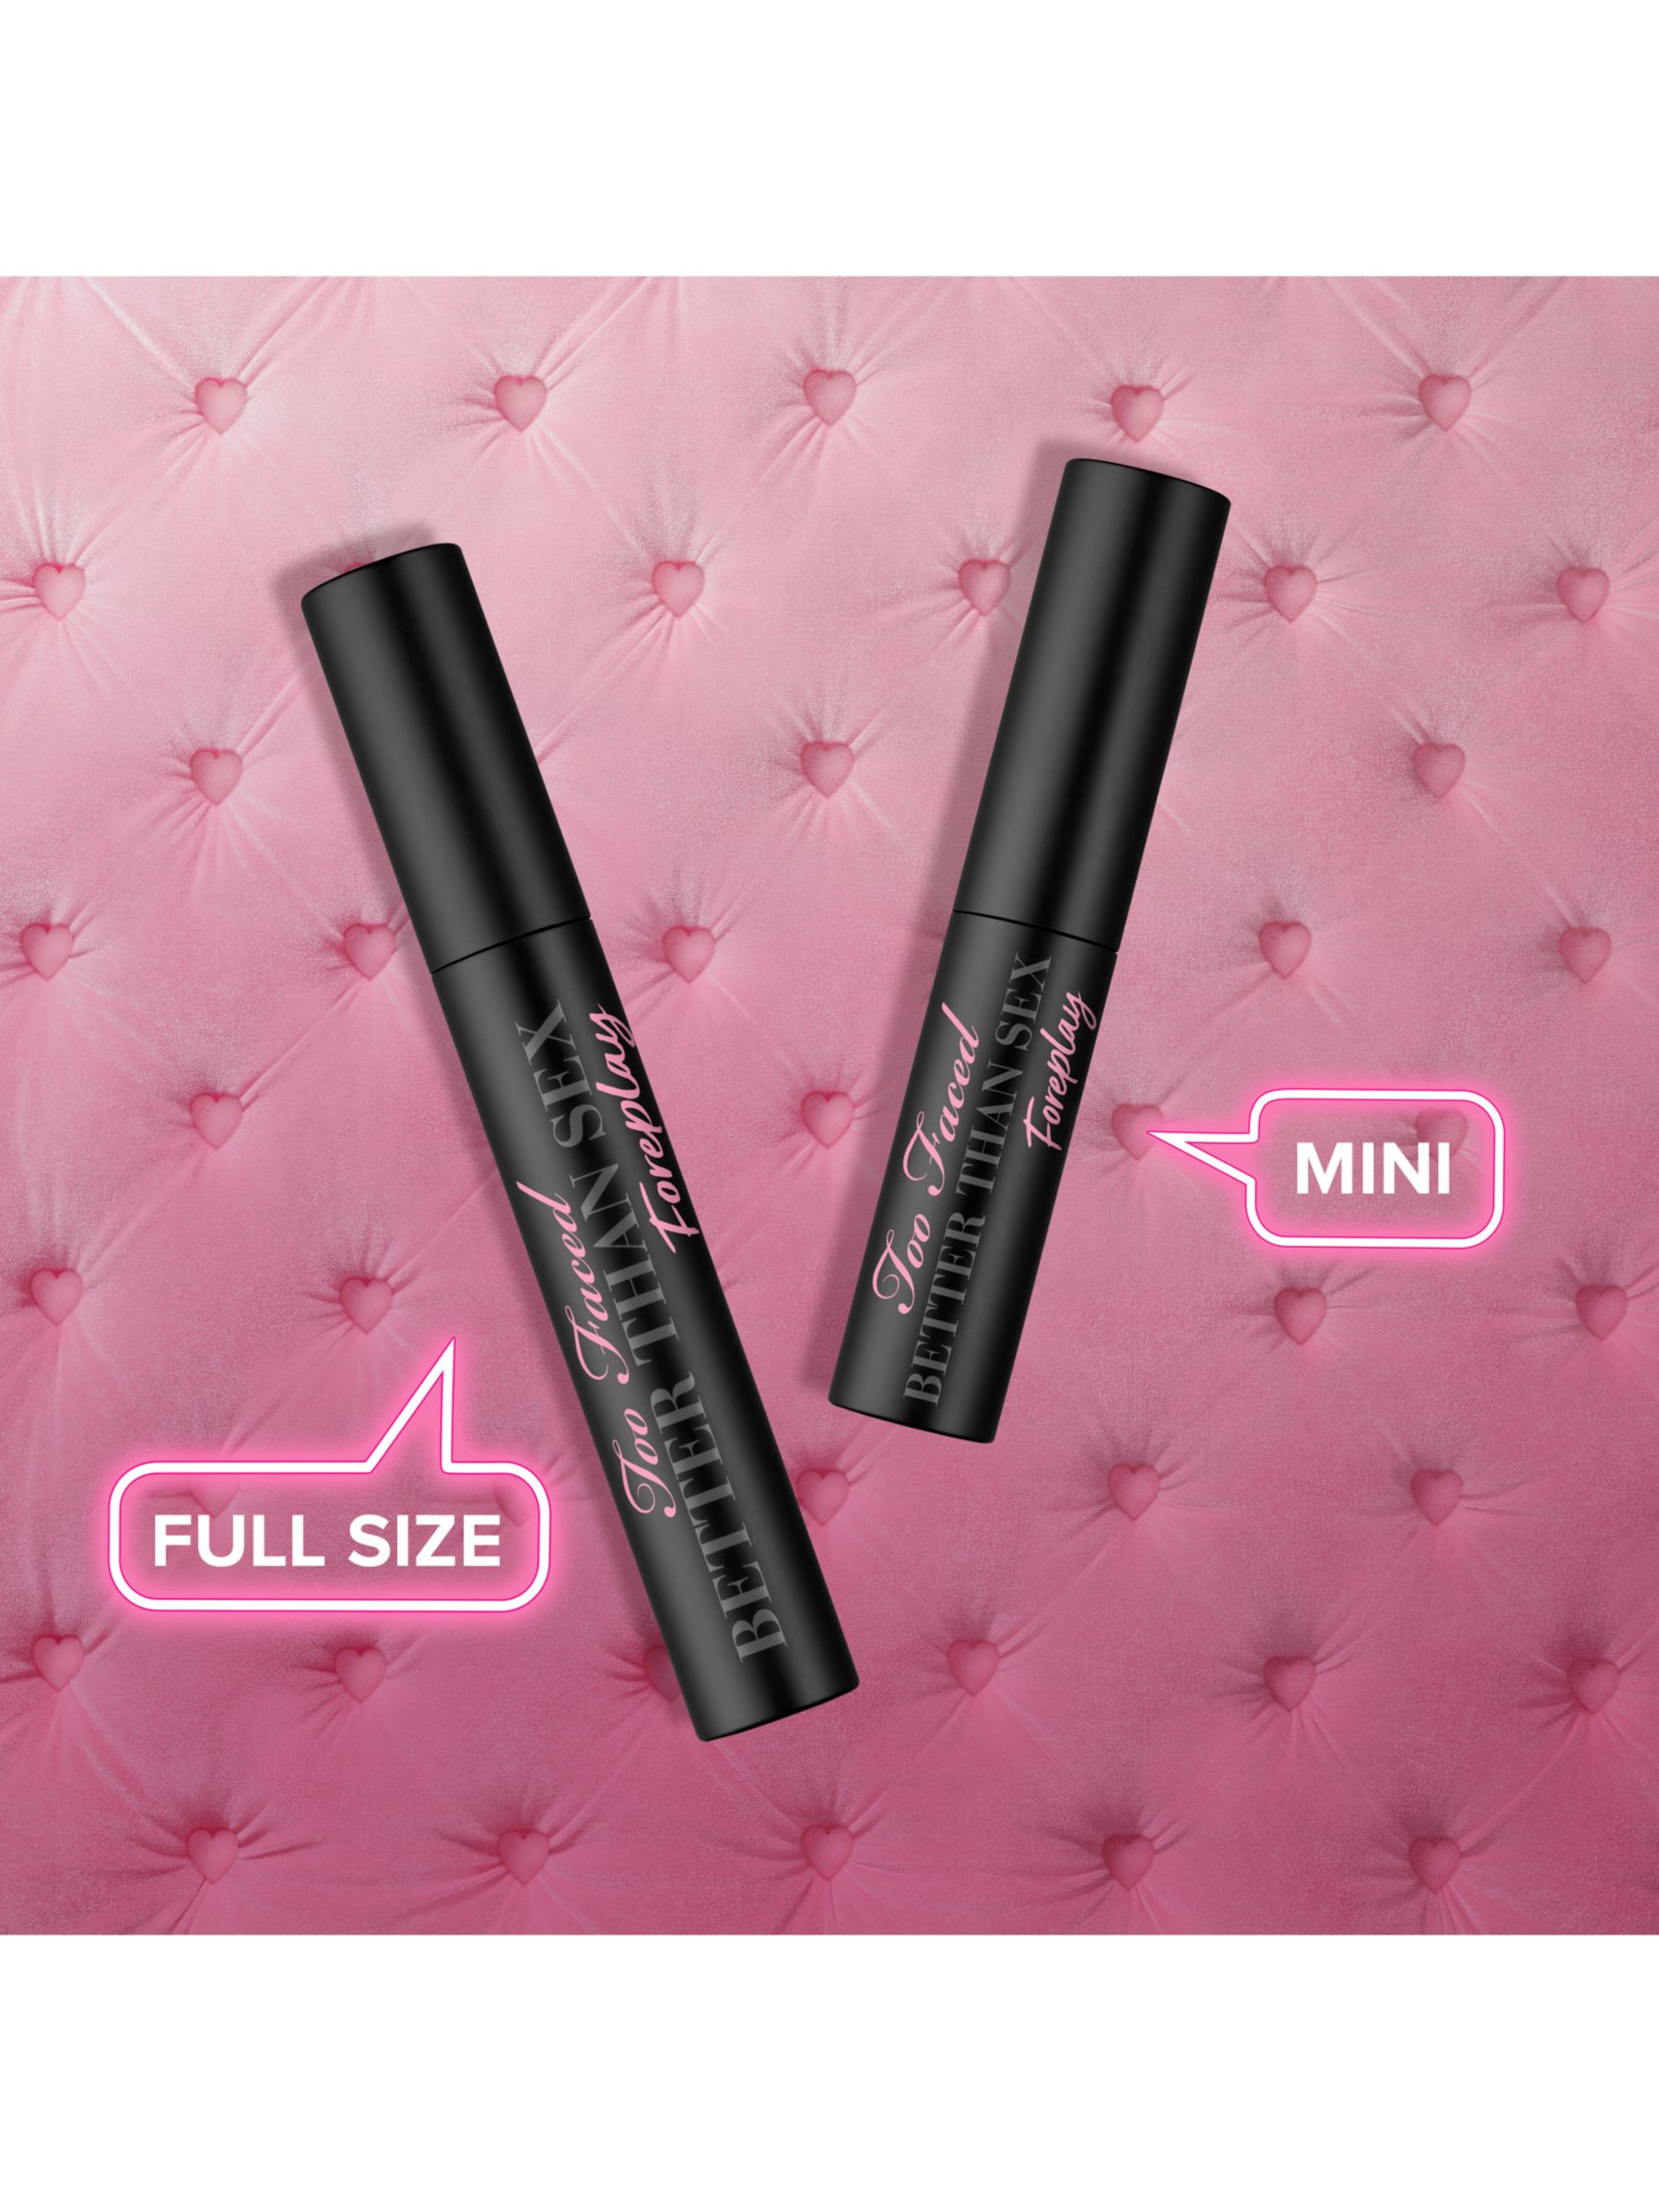 Too Faced Better Than Sex Foreplay Lash Lifting and Thickening Mascara Primer, Travel Size, 4ml 6